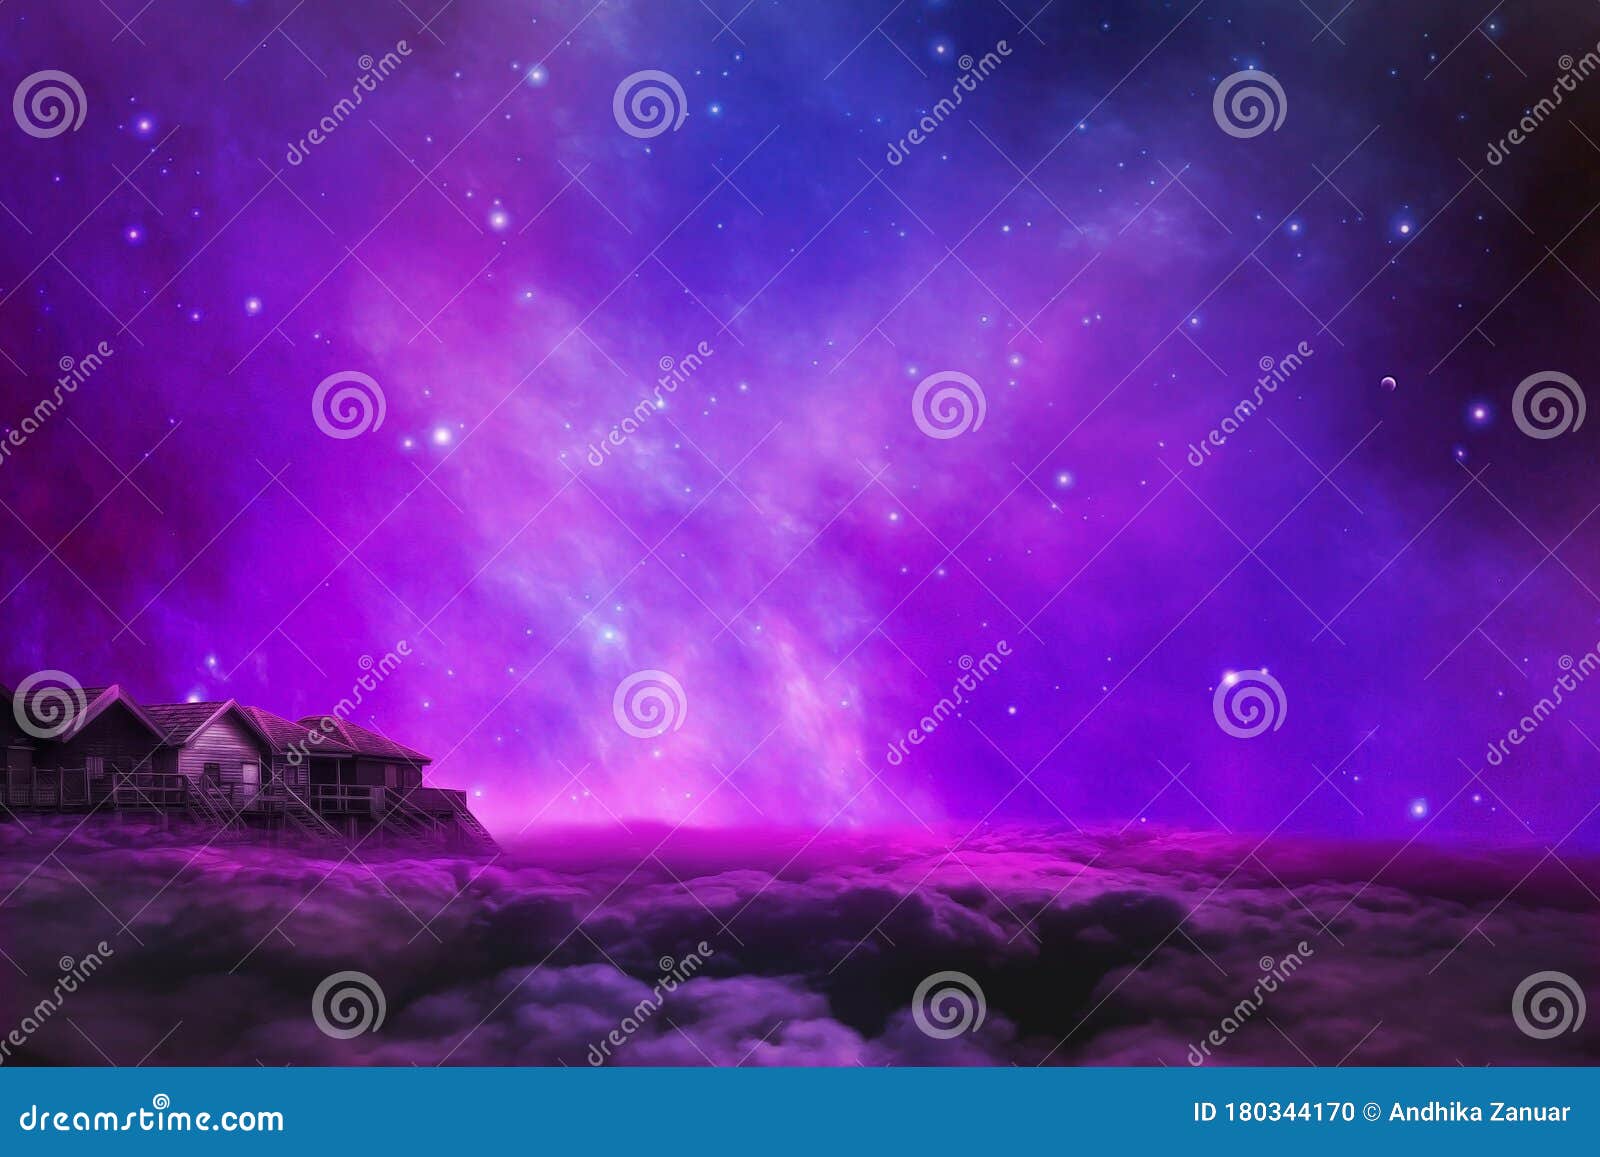 Fantasy Landscape - Home Silhouette with Sea of Clouds and Galaxy in the  Sky Stock Photo - Image of mysterious, nature: 180344170